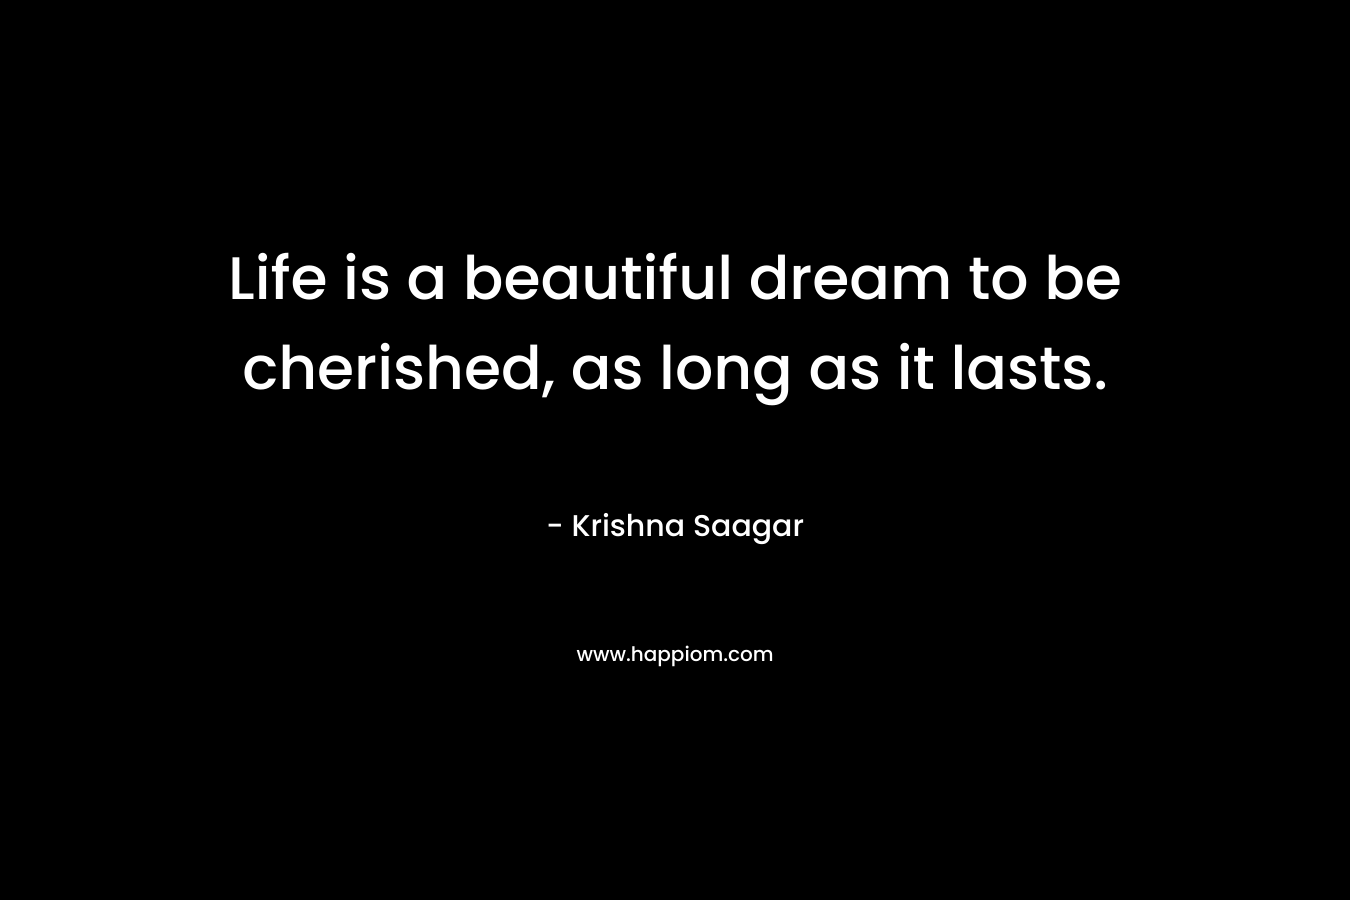 Life is a beautiful dream to be cherished, as long as it lasts. – Krishna Saagar